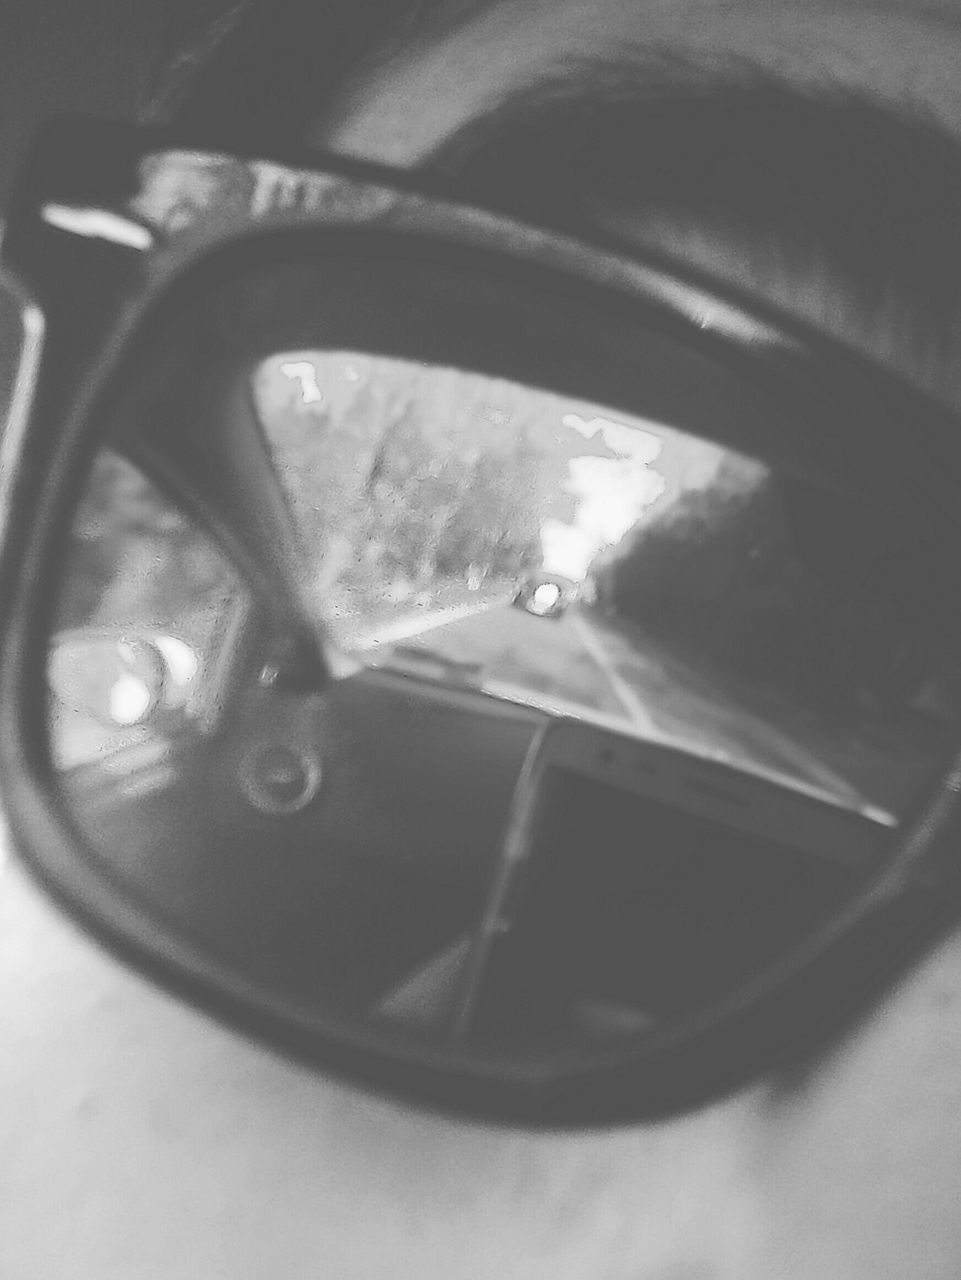 transportation, mode of transport, close-up, land vehicle, car, reflection, part of, vehicle interior, indoors, glass - material, car interior, side-view mirror, travel, road, transparent, cropped, day, street